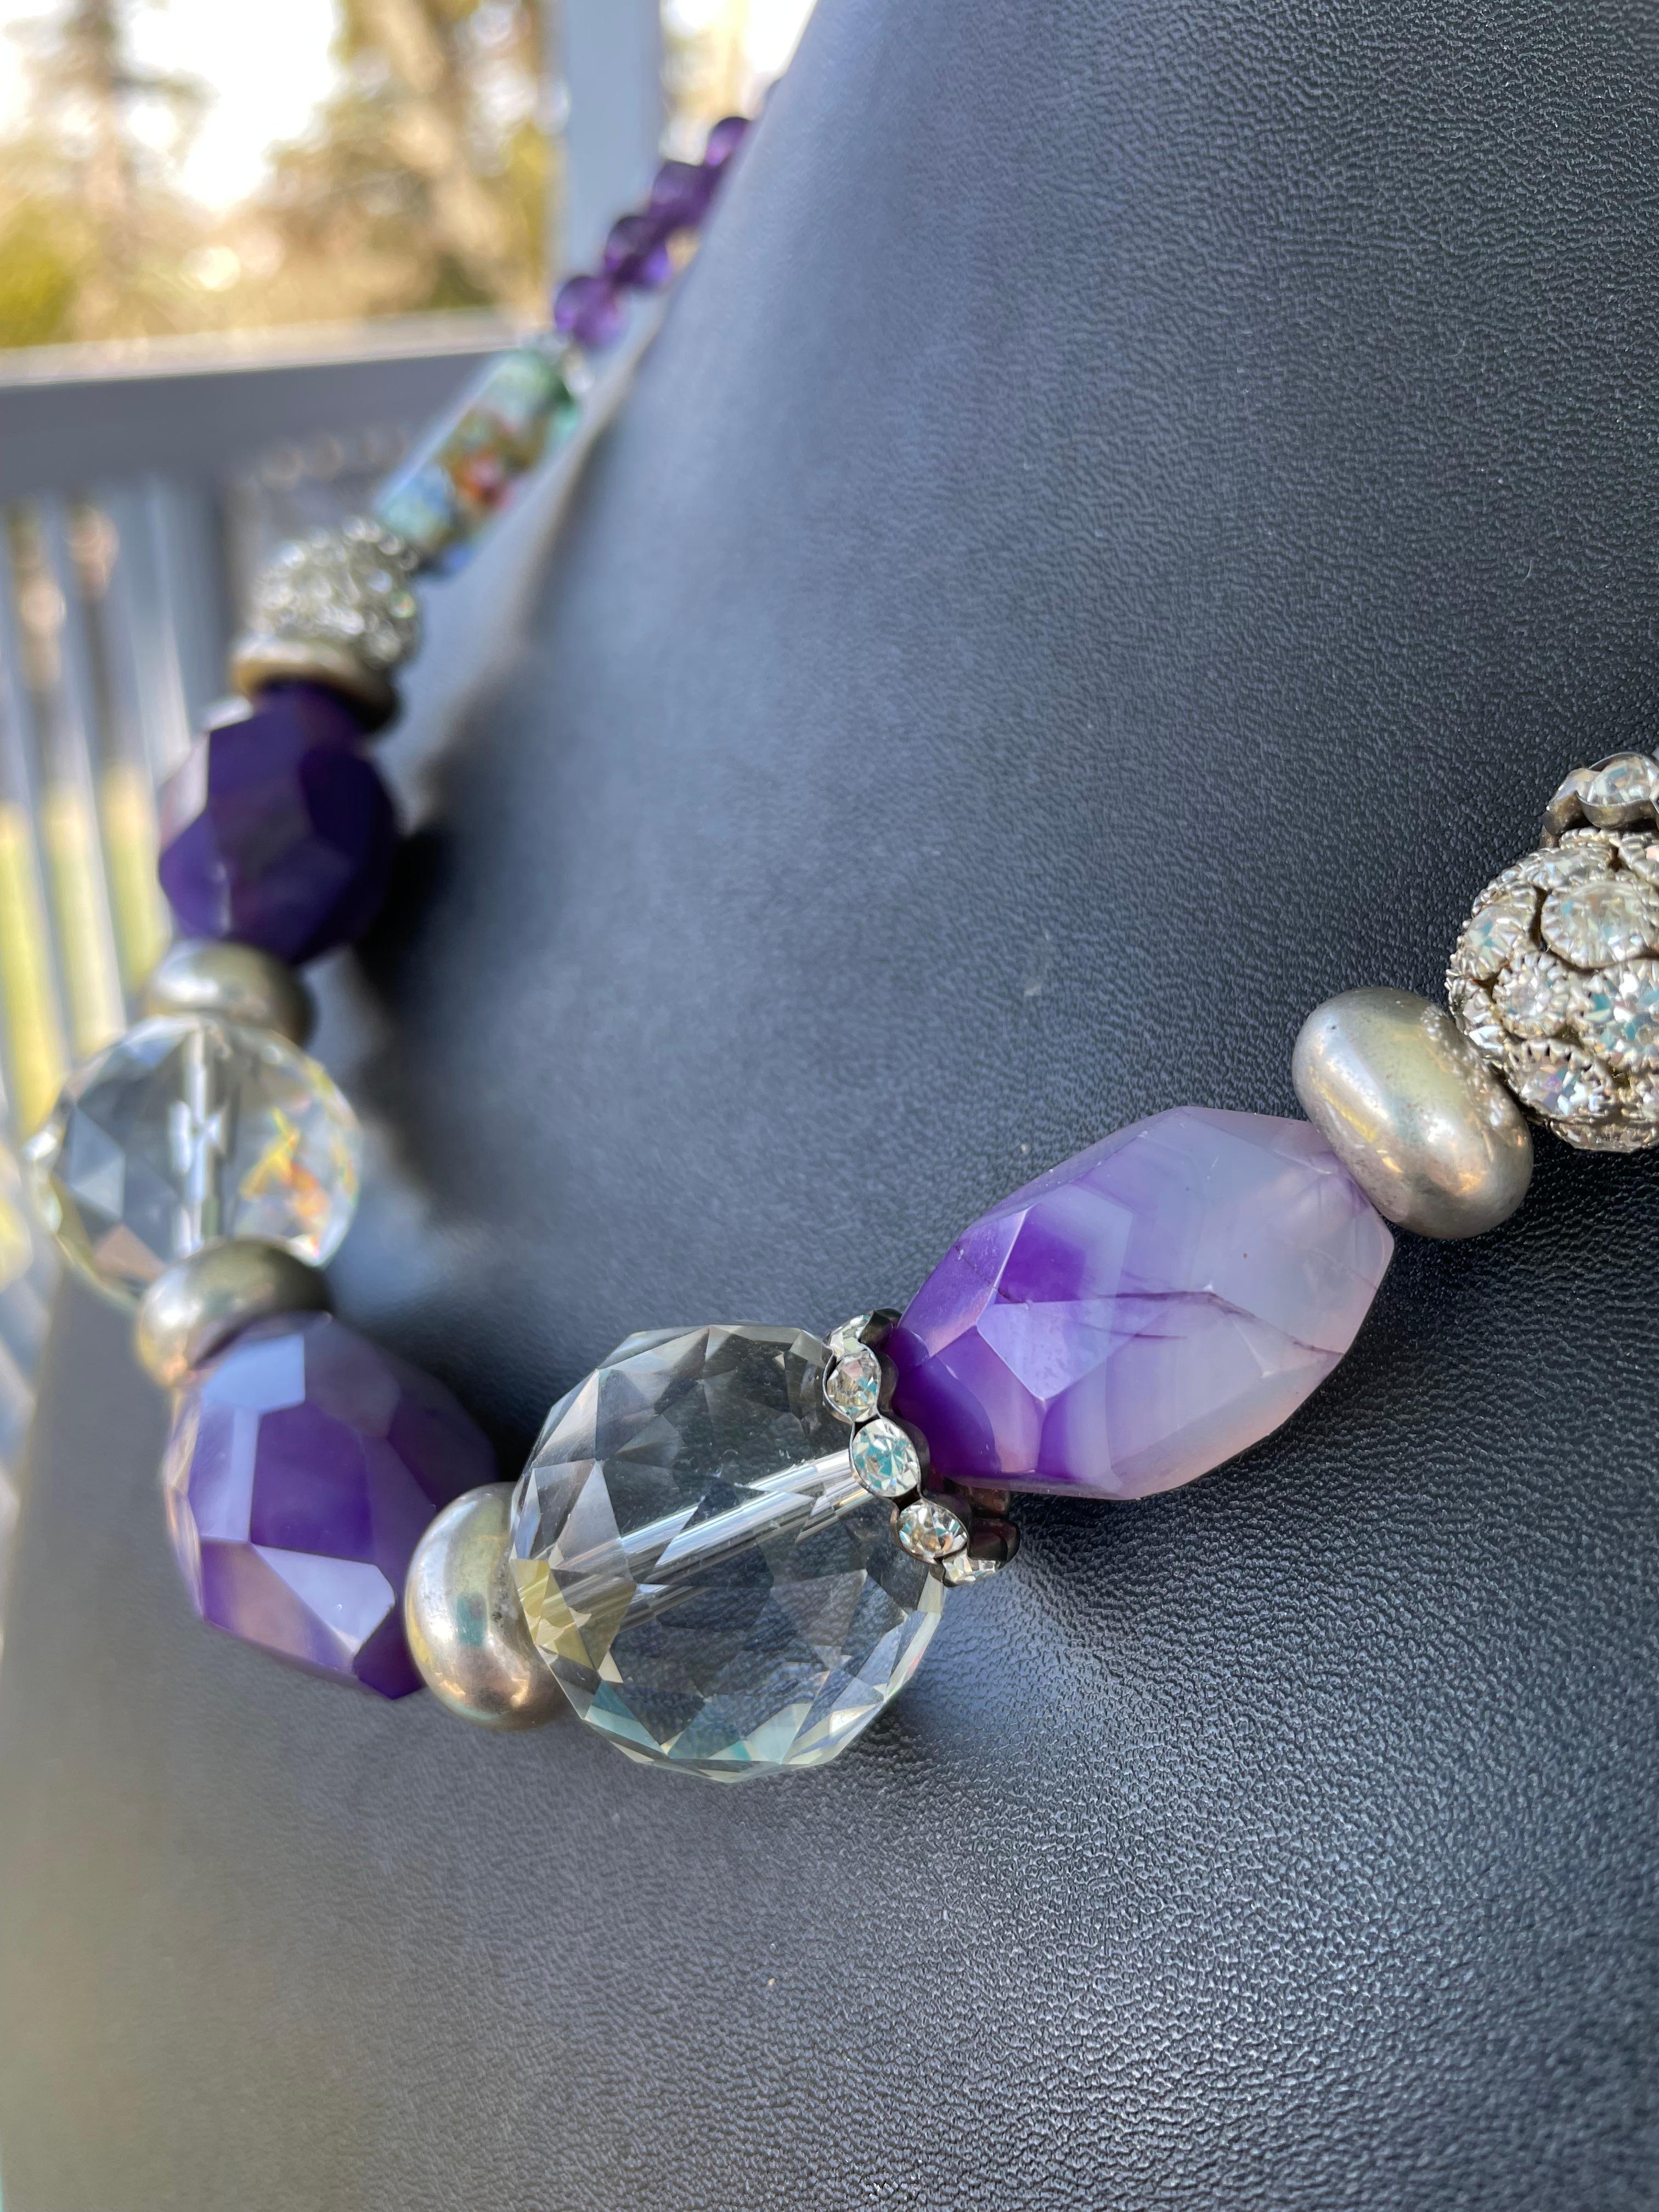 Lorraine’s Bijoux offers a unique ,OOAK, handmade, Beaded necklace of fabulous purple dyed agates, genuine Amethyst and stunning Crystal. This is truly a Statement piece that includes vintage Sterling Silver donut rondelles, inlaid crystal balls,